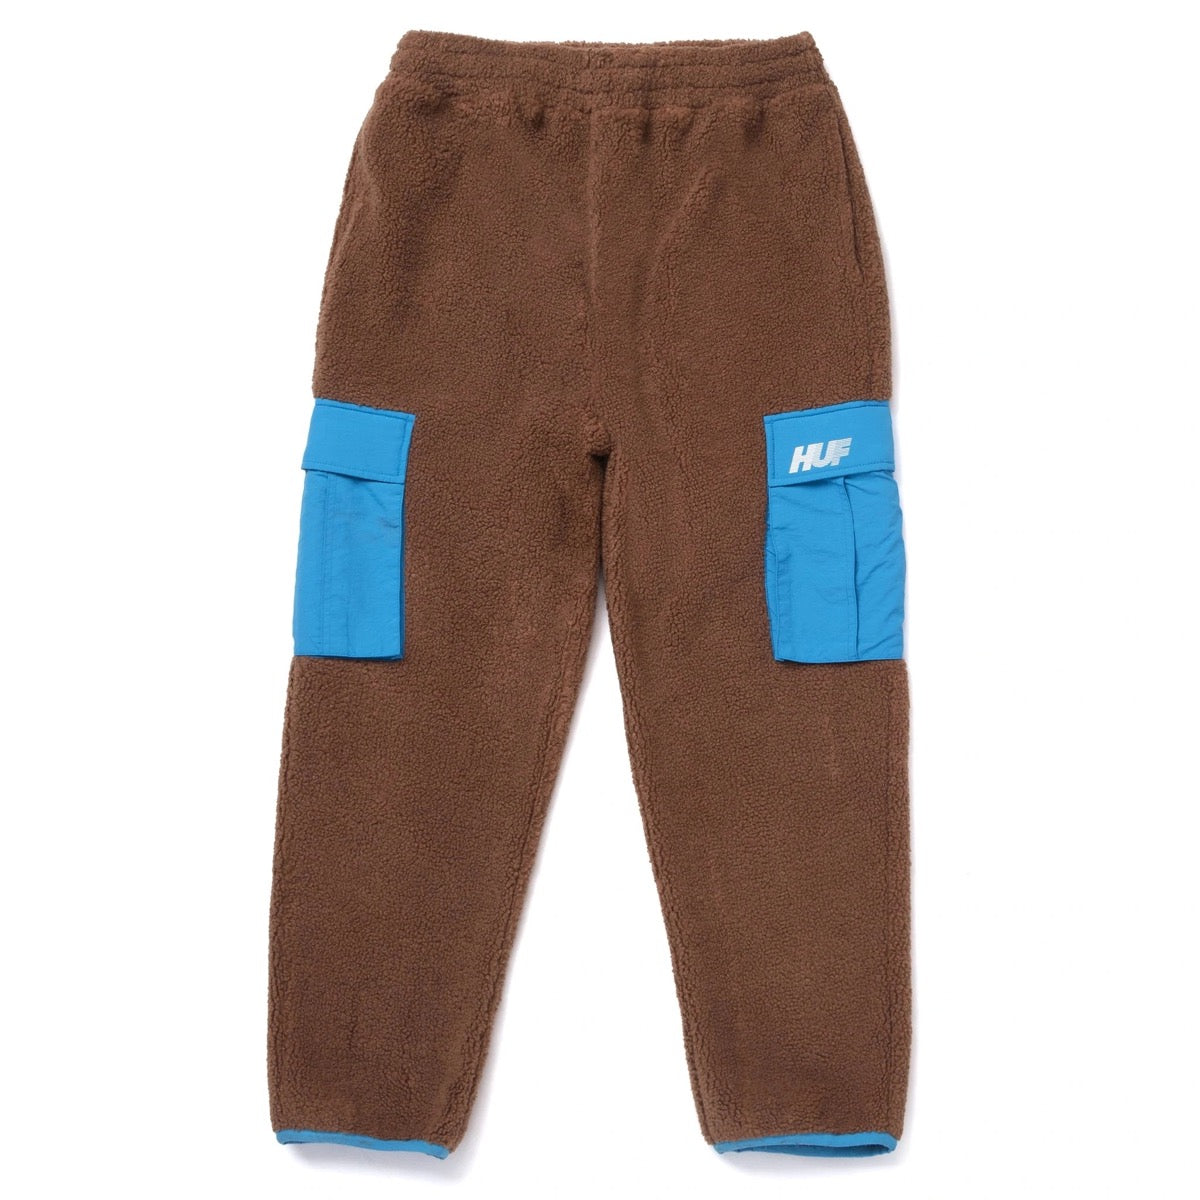 FORT POINT SHERPA PANT DUST BROWN